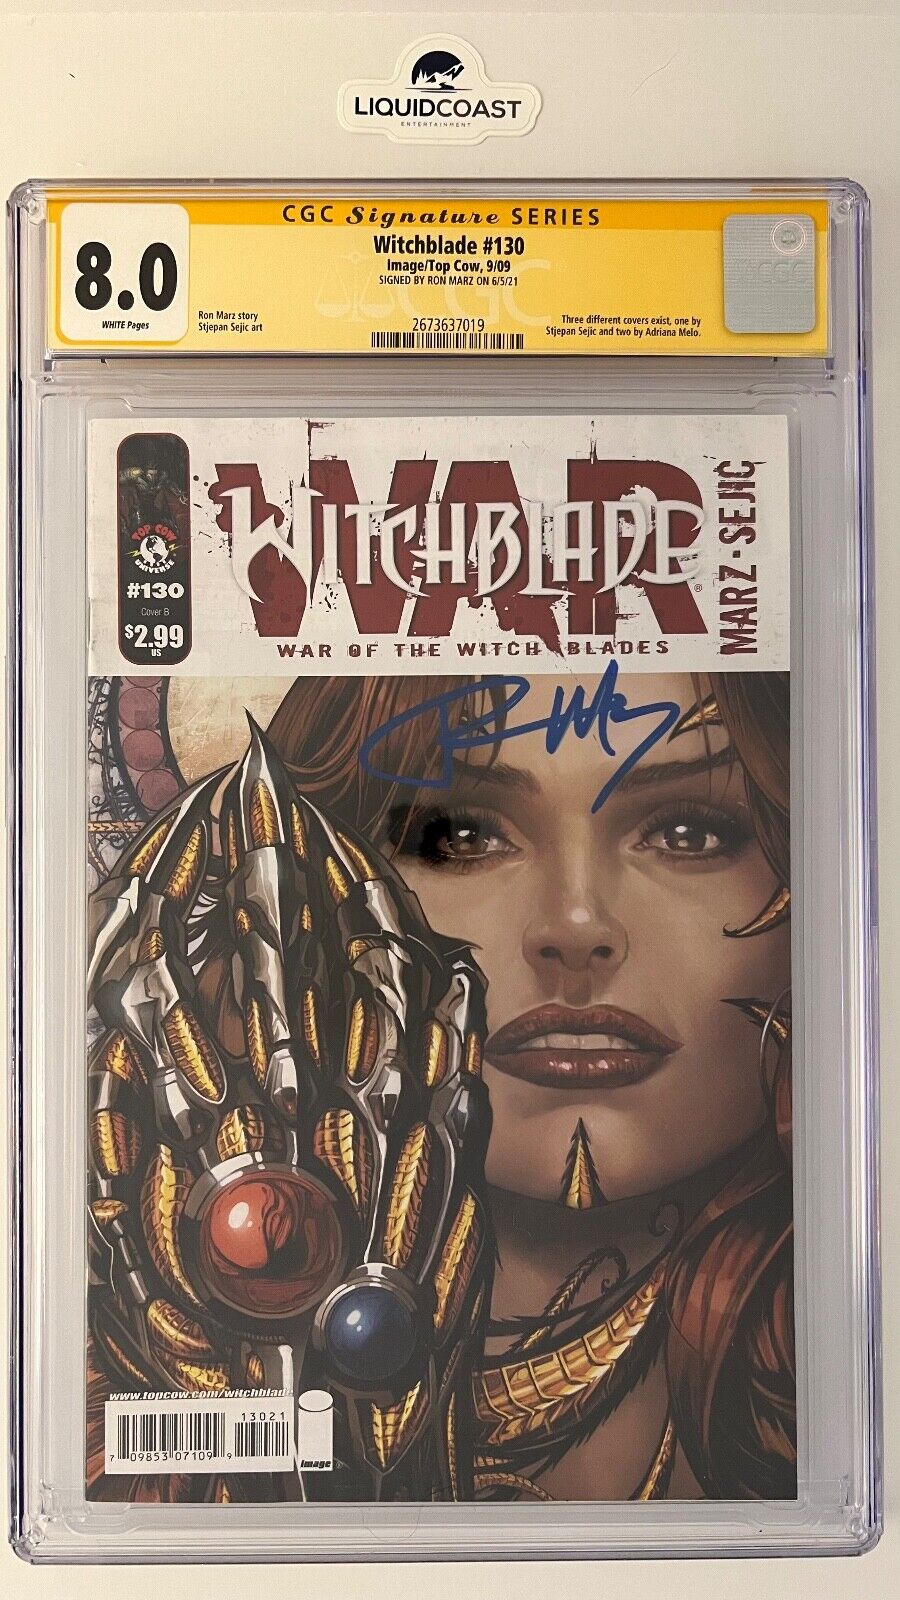 Witchblade #130 SS CGC 8.0 signed by Ron Marz